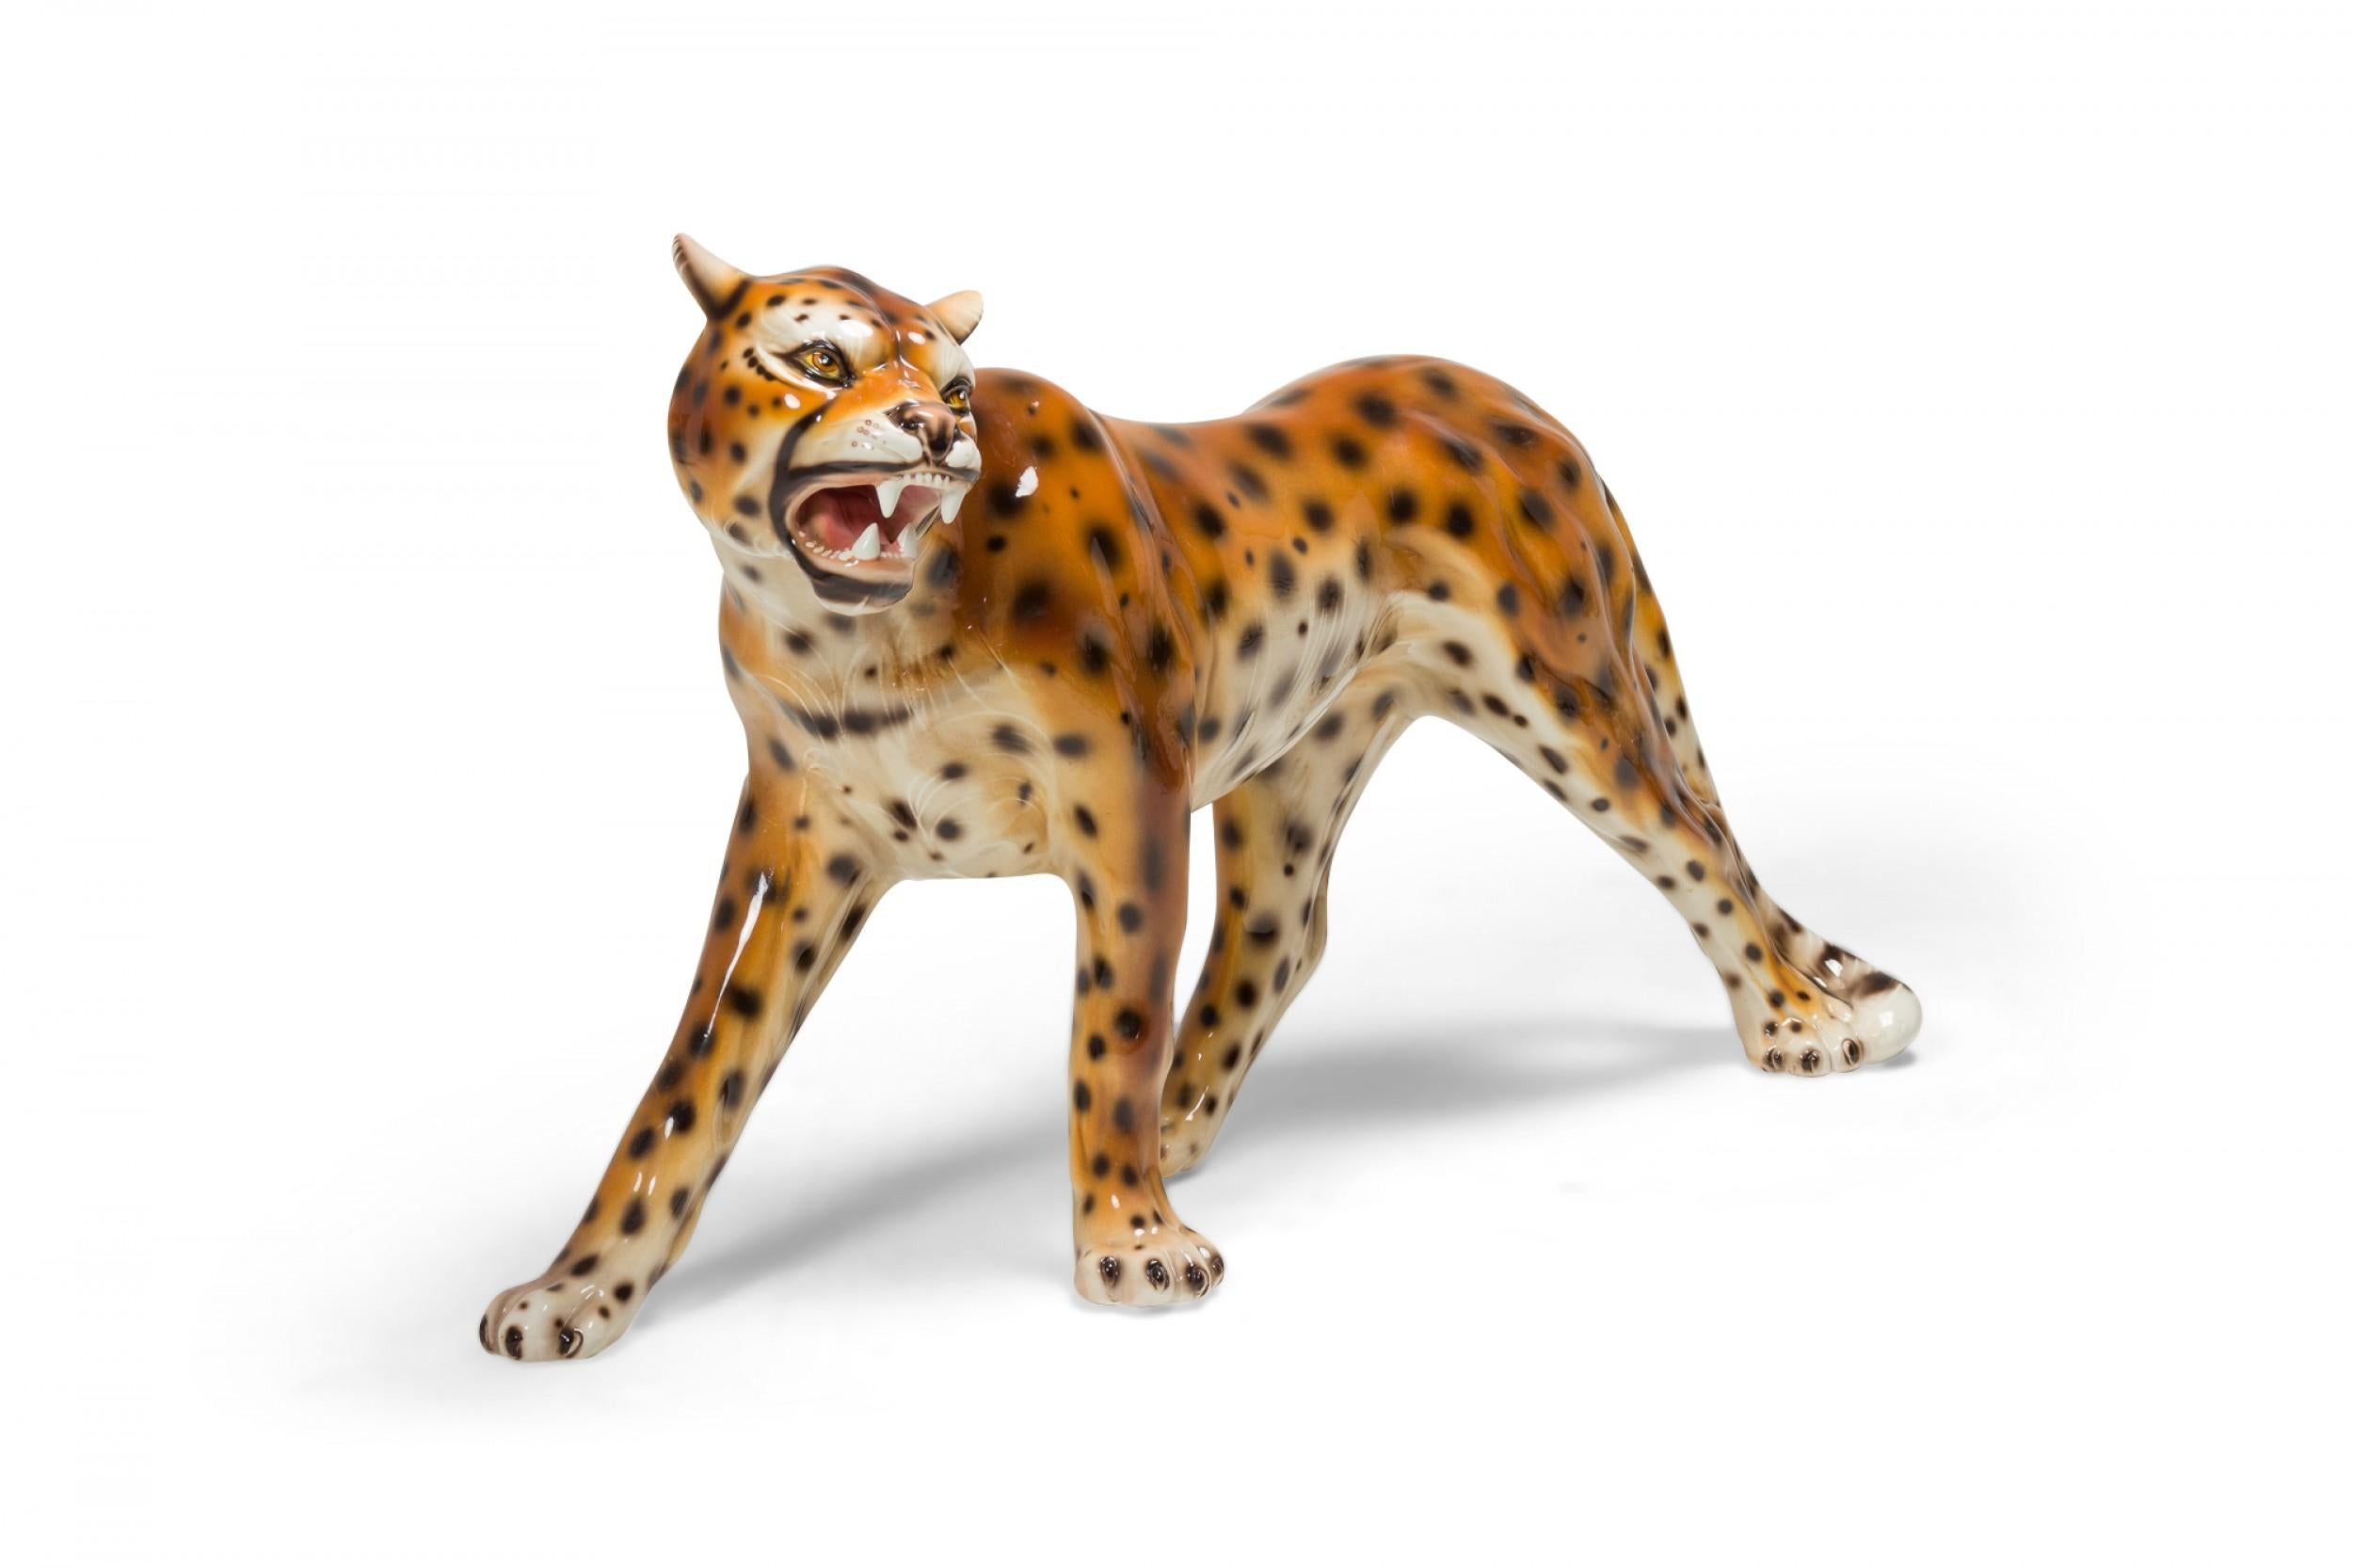 Italian Mid-Century porcelain sculpture of a leopard, mid-stride, with open mouth. (manner of Capodimonte).
 